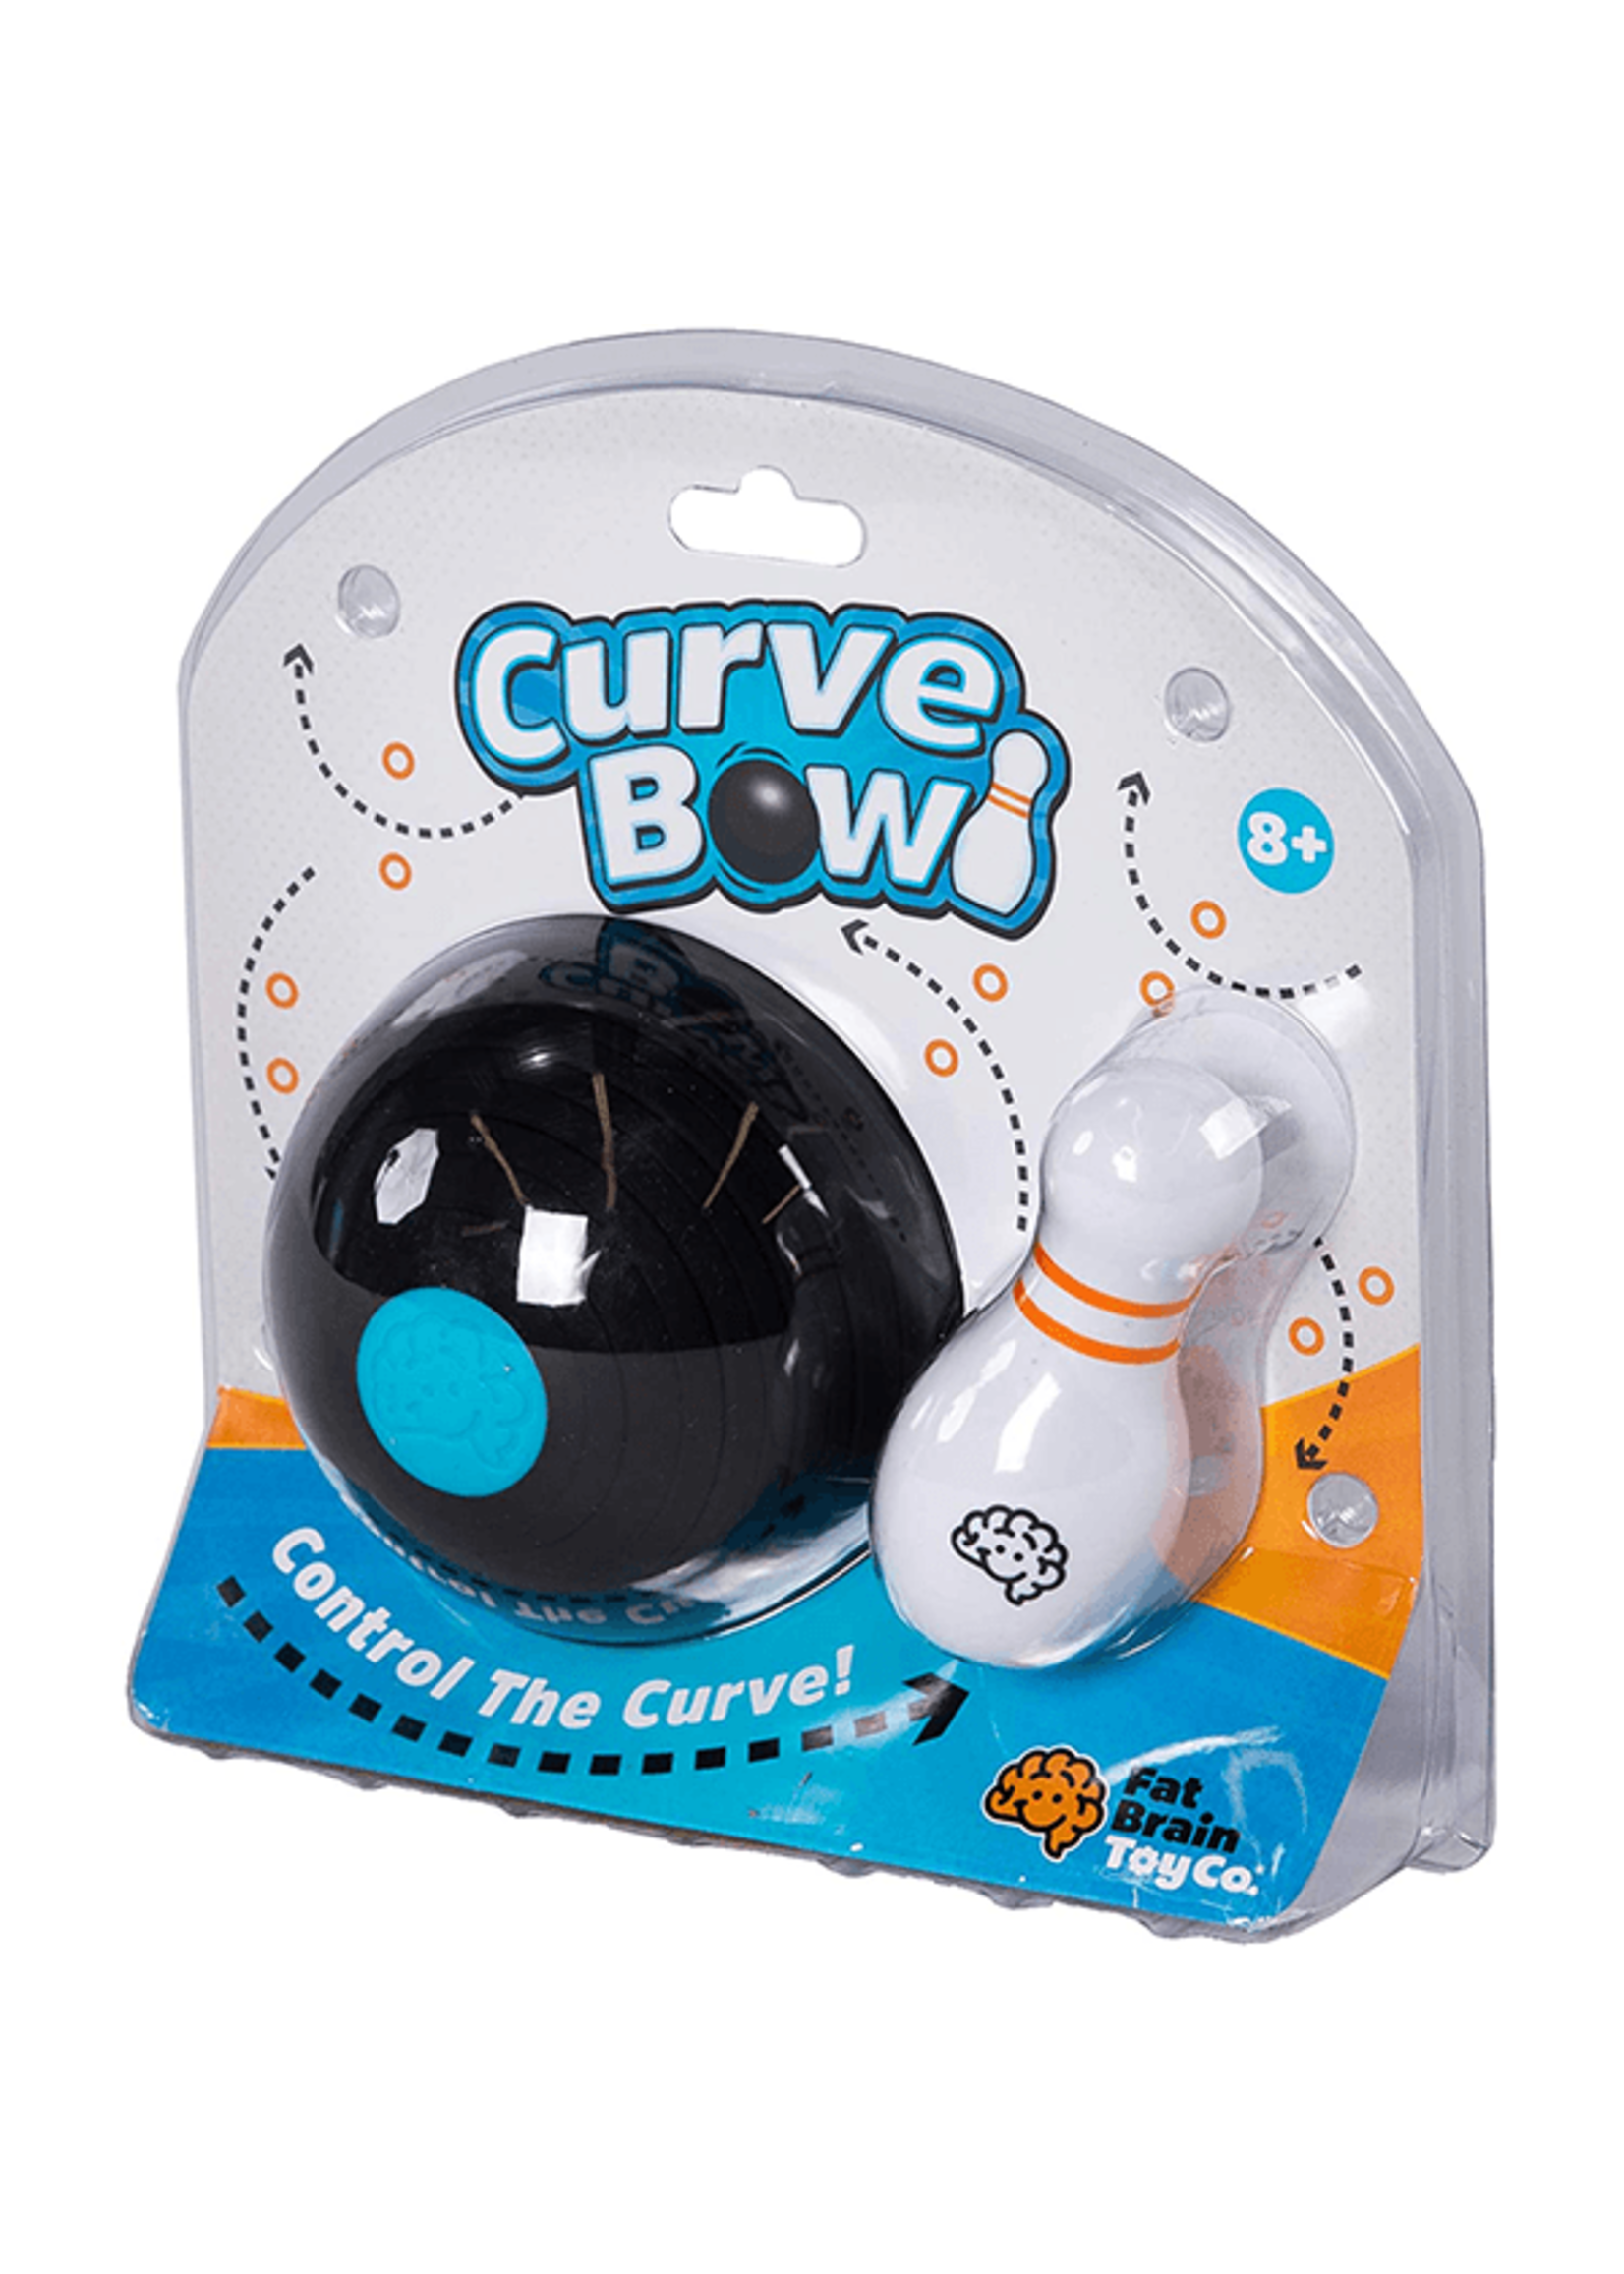 Fat Brain Toy Co. Fat Brain Toys Curve Bowl Game